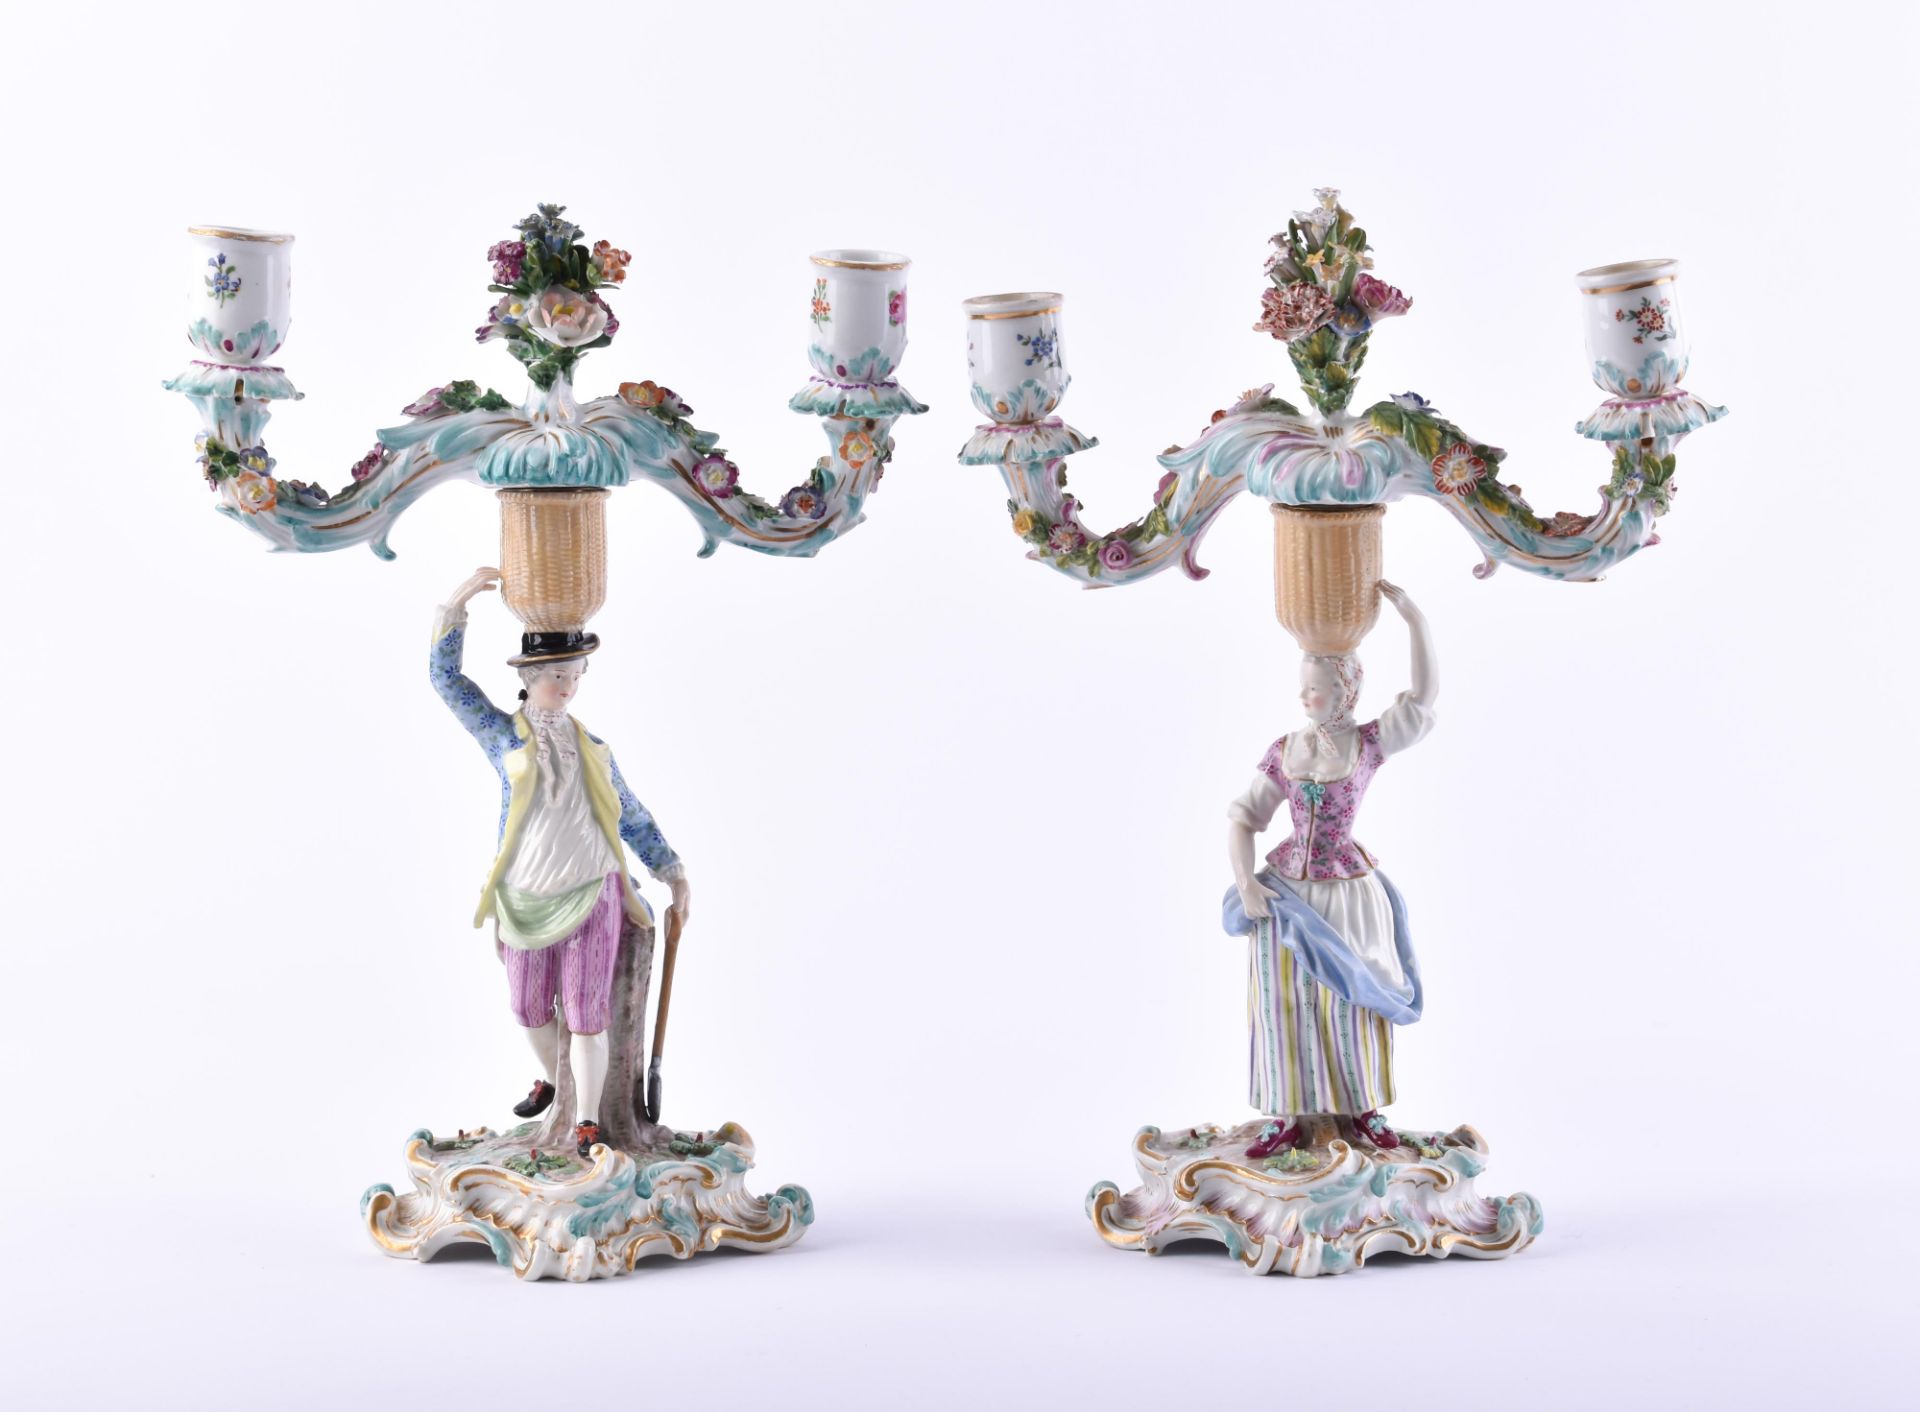  figural pair of candlesticks Meissen 19th century - Image 2 of 9